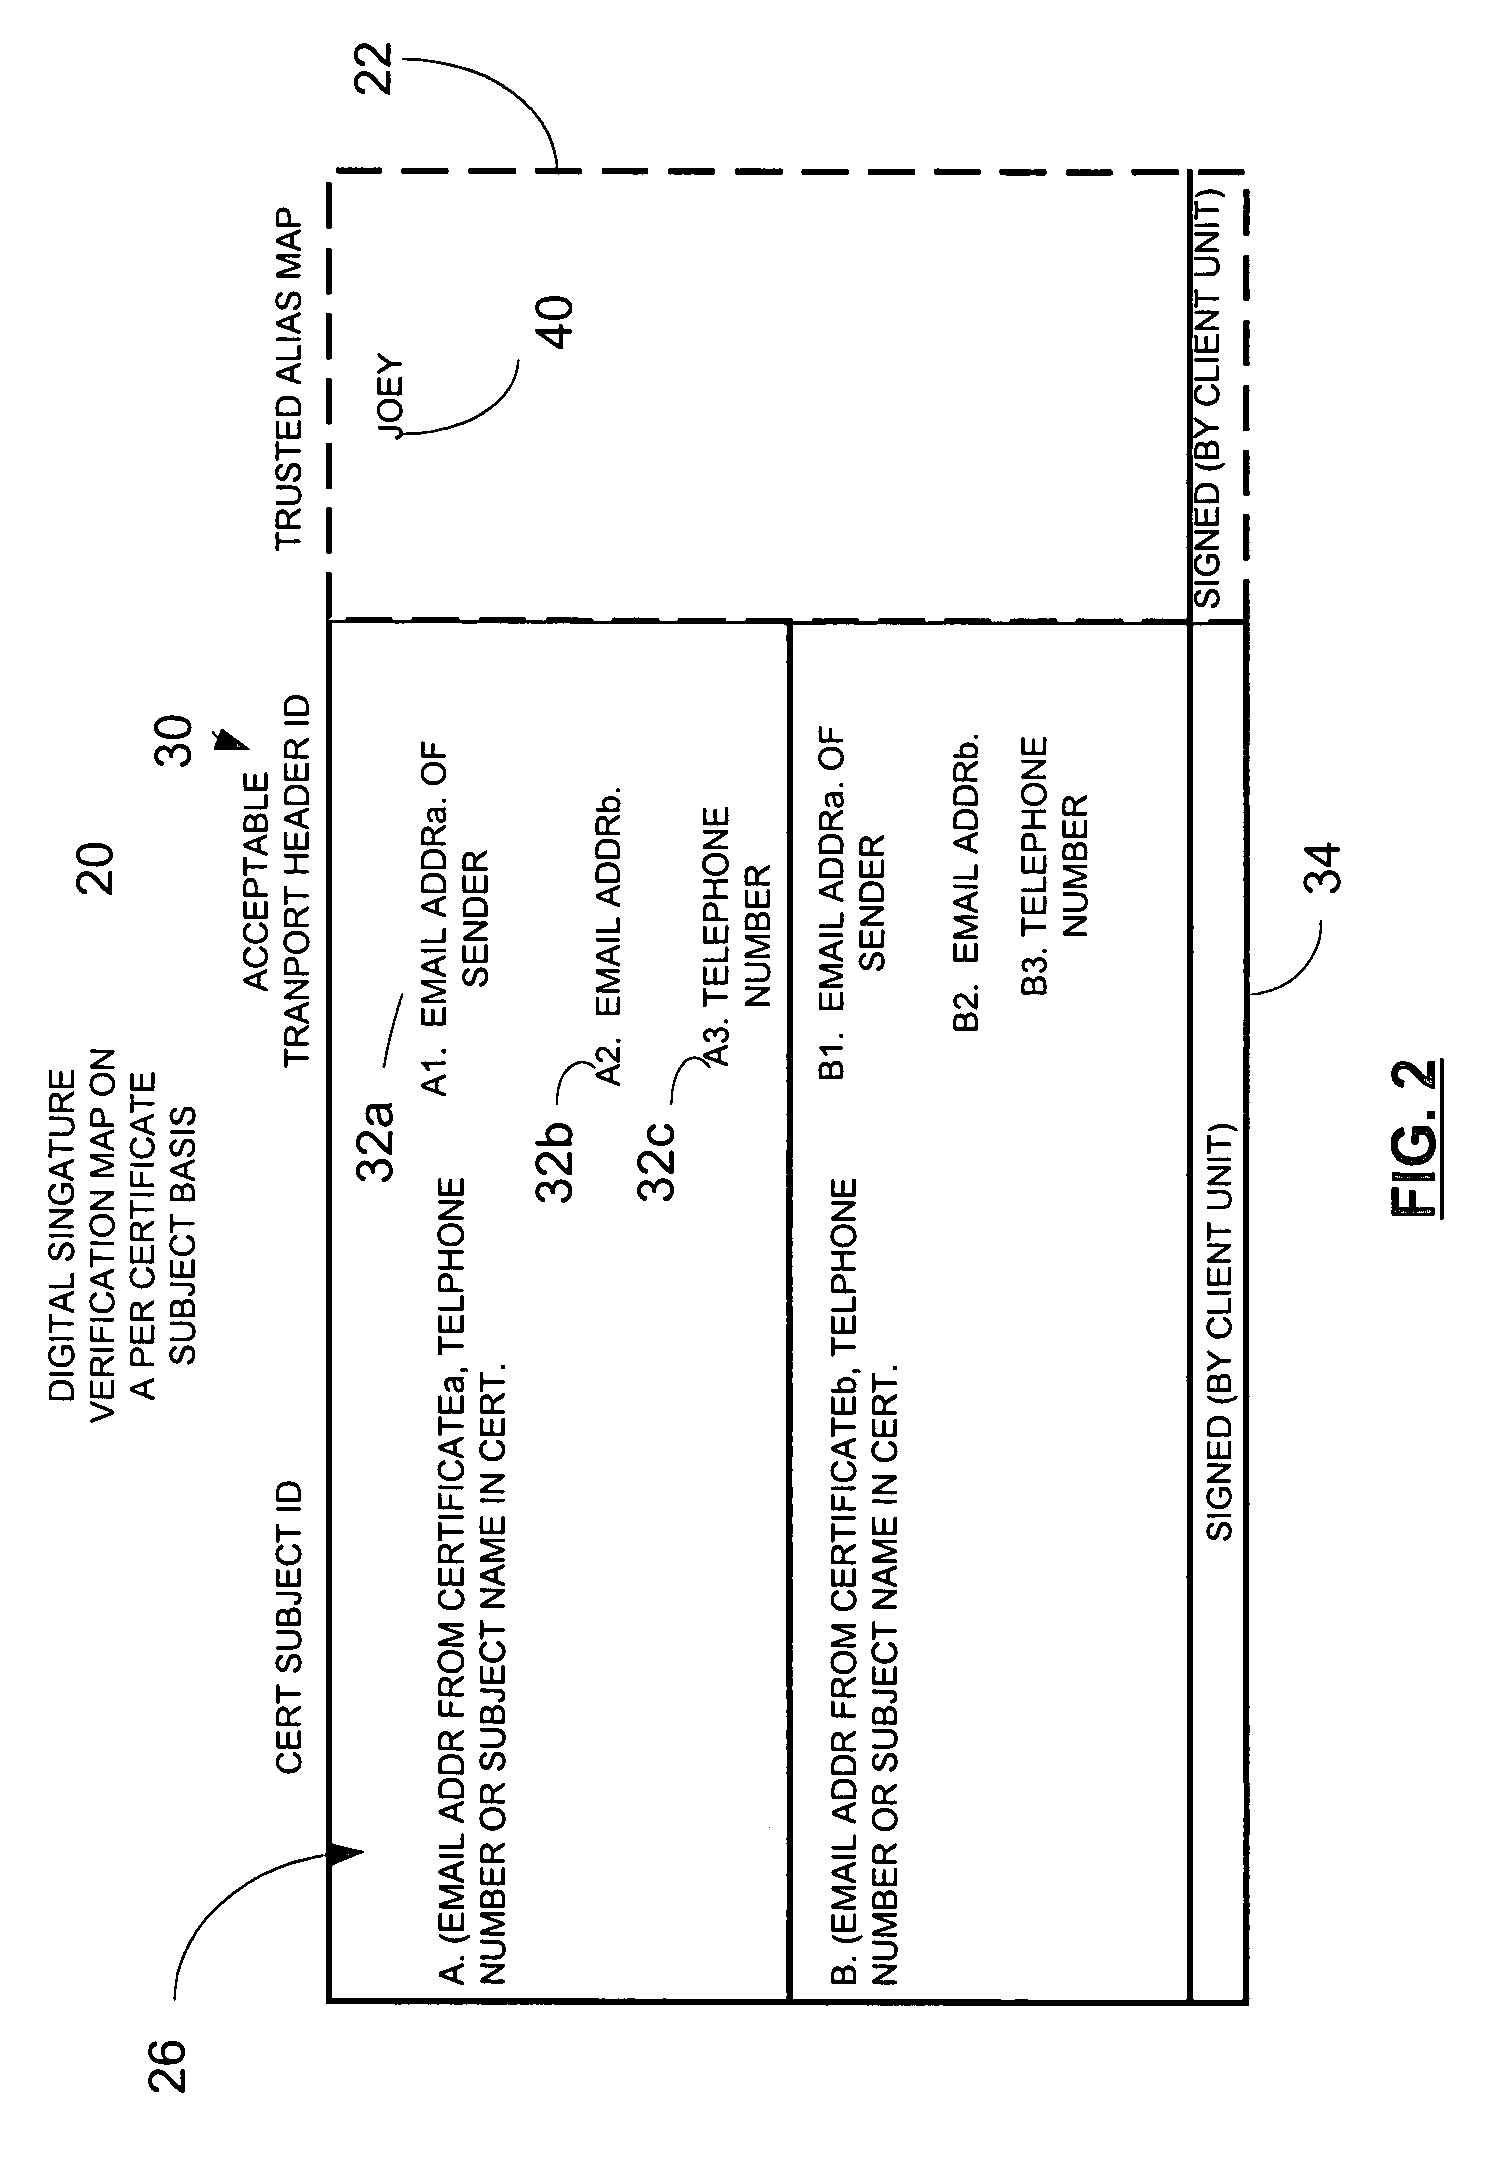 Method and apparatus for providing information security to prevent digital signature forgery